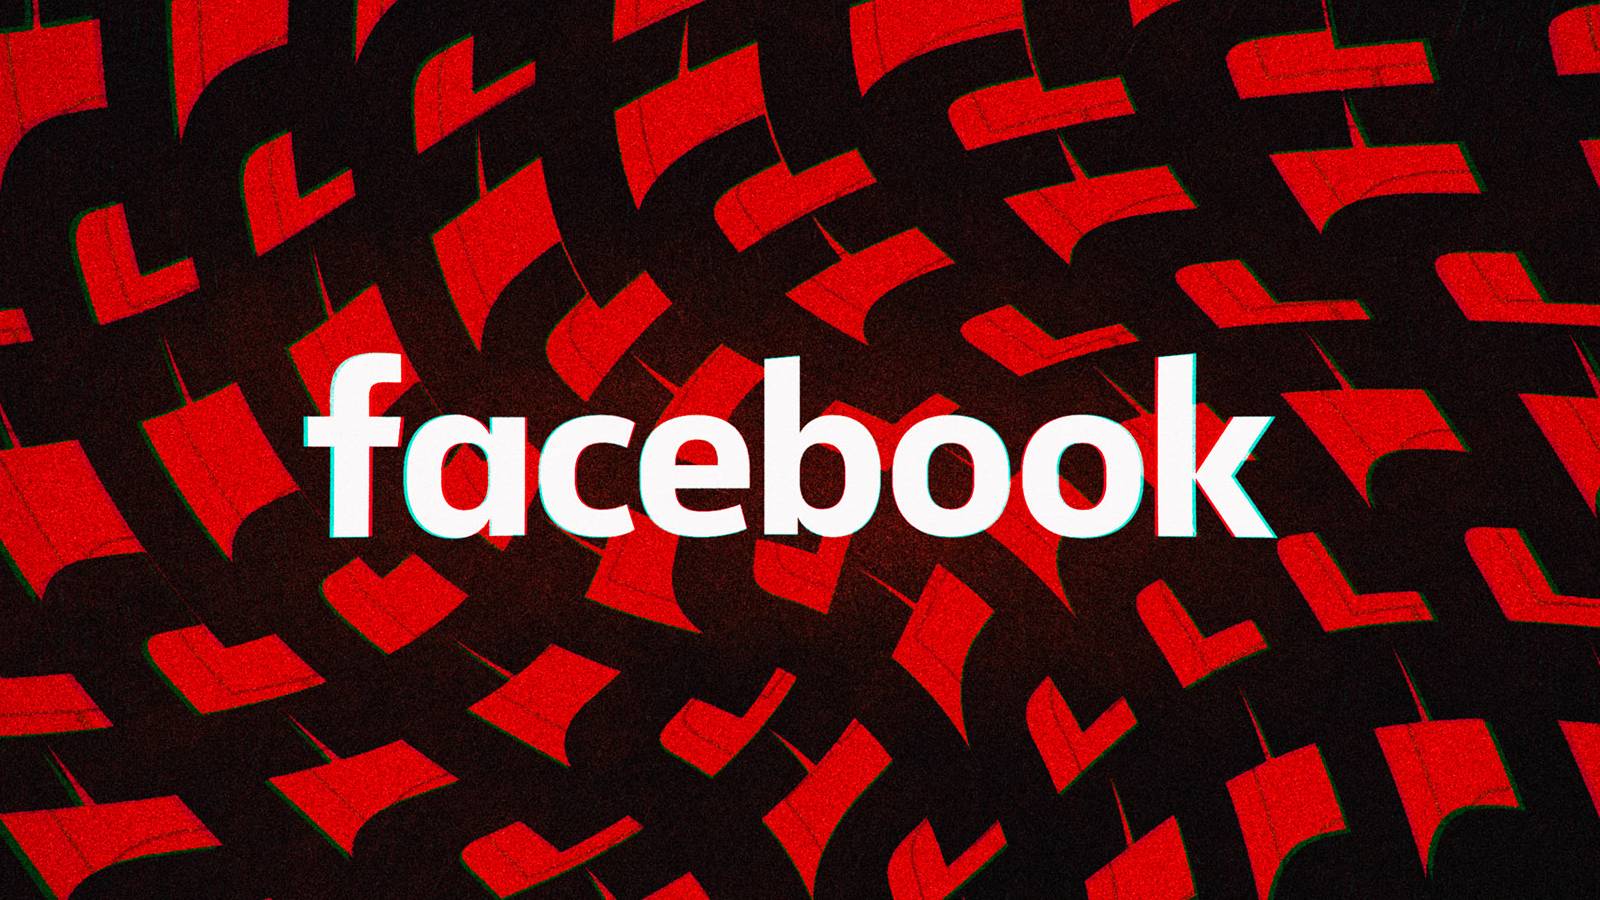 Facebook has a New Update that it offers for Phones and Tablets